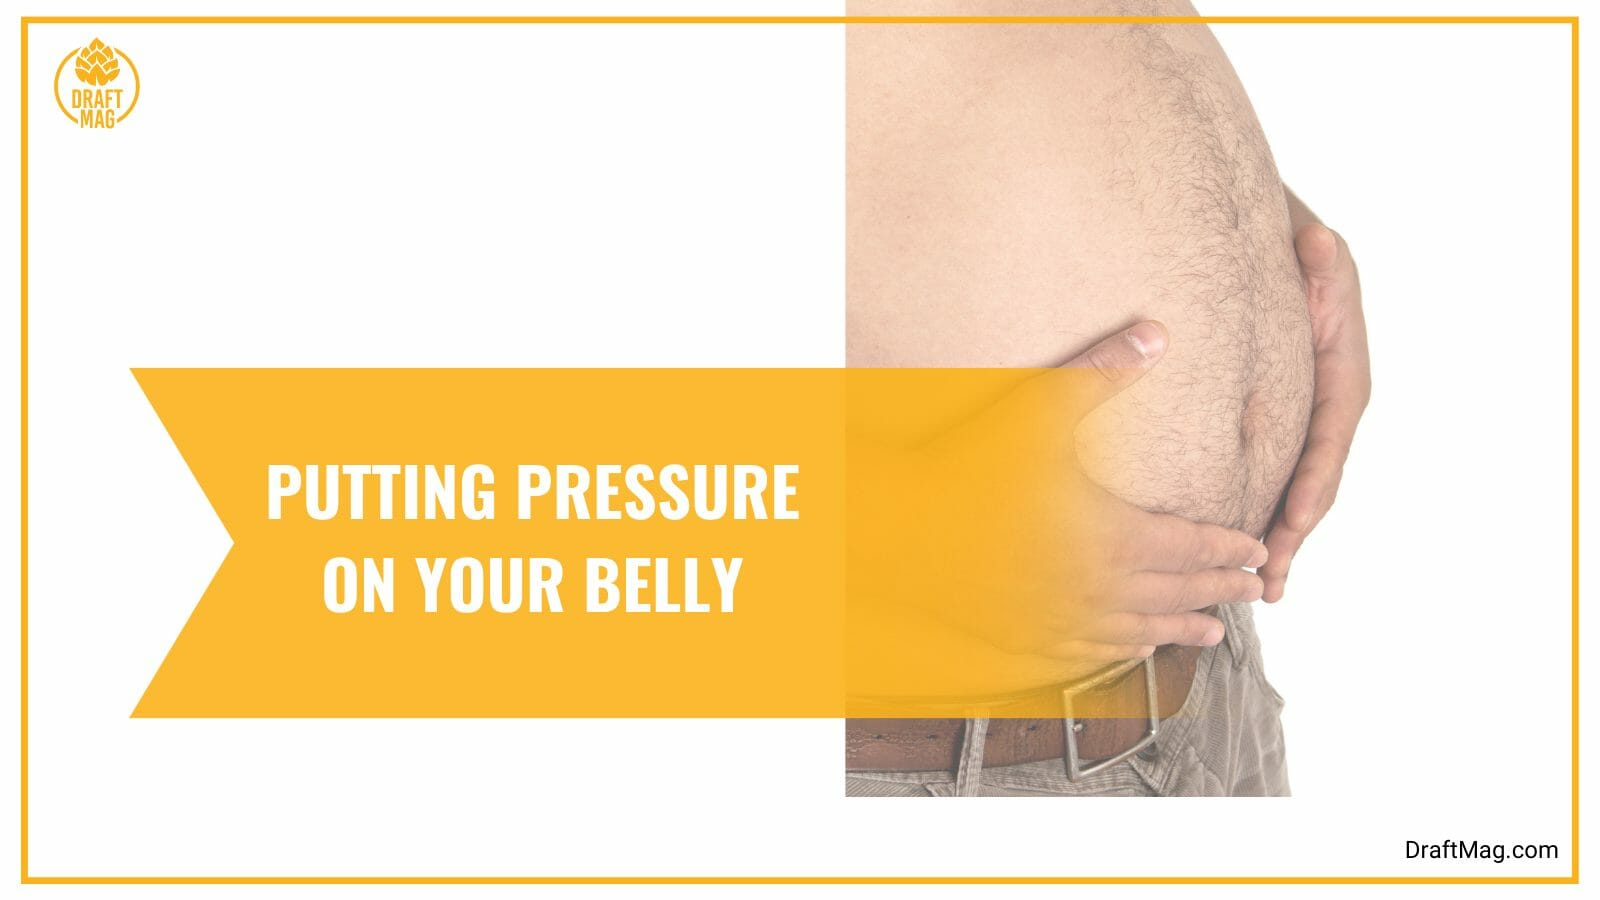 Put pressure on your belly